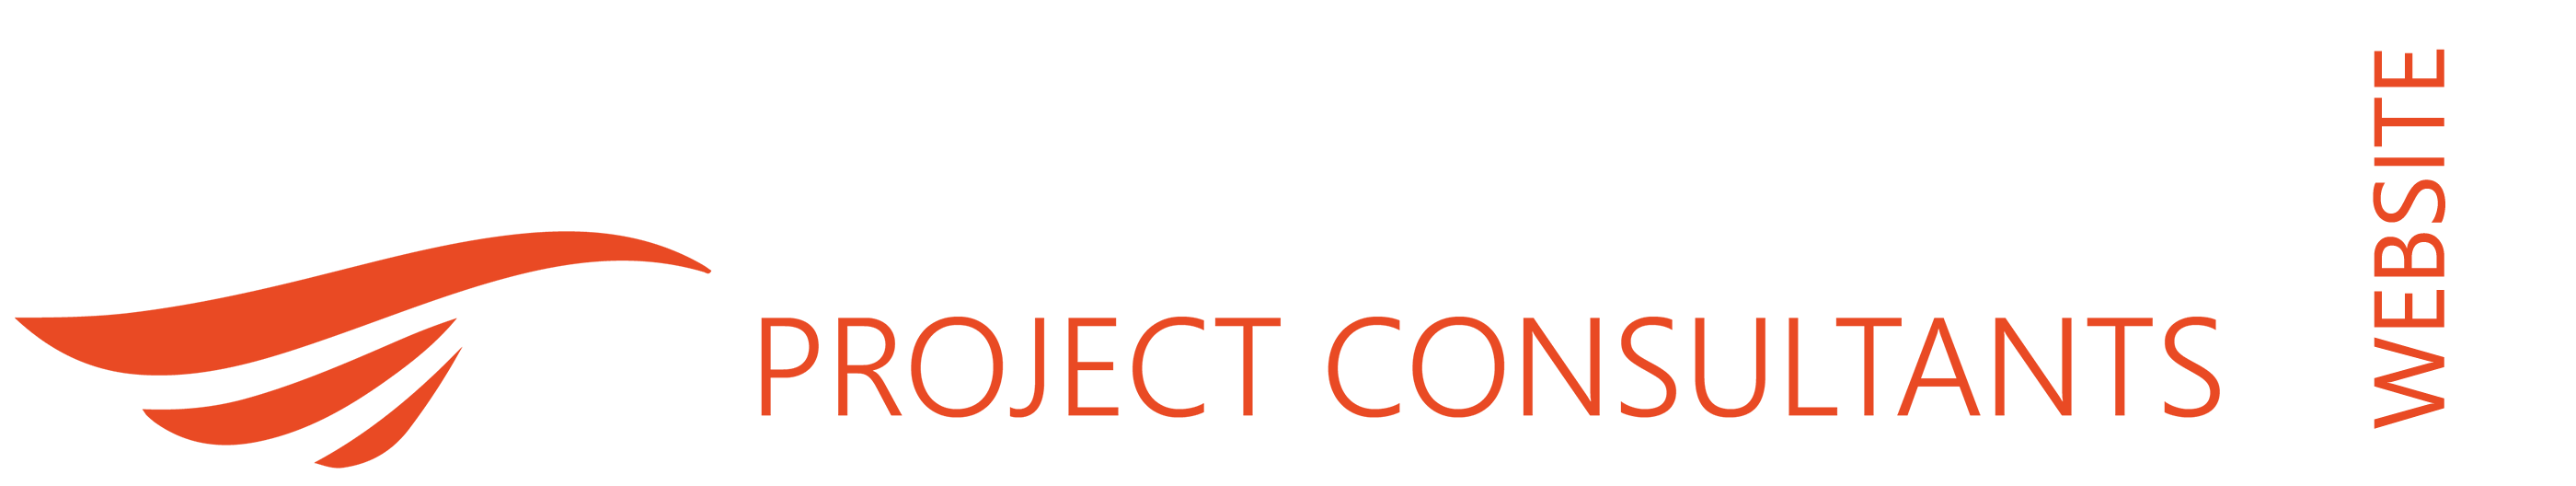 Archetype Project Consultants